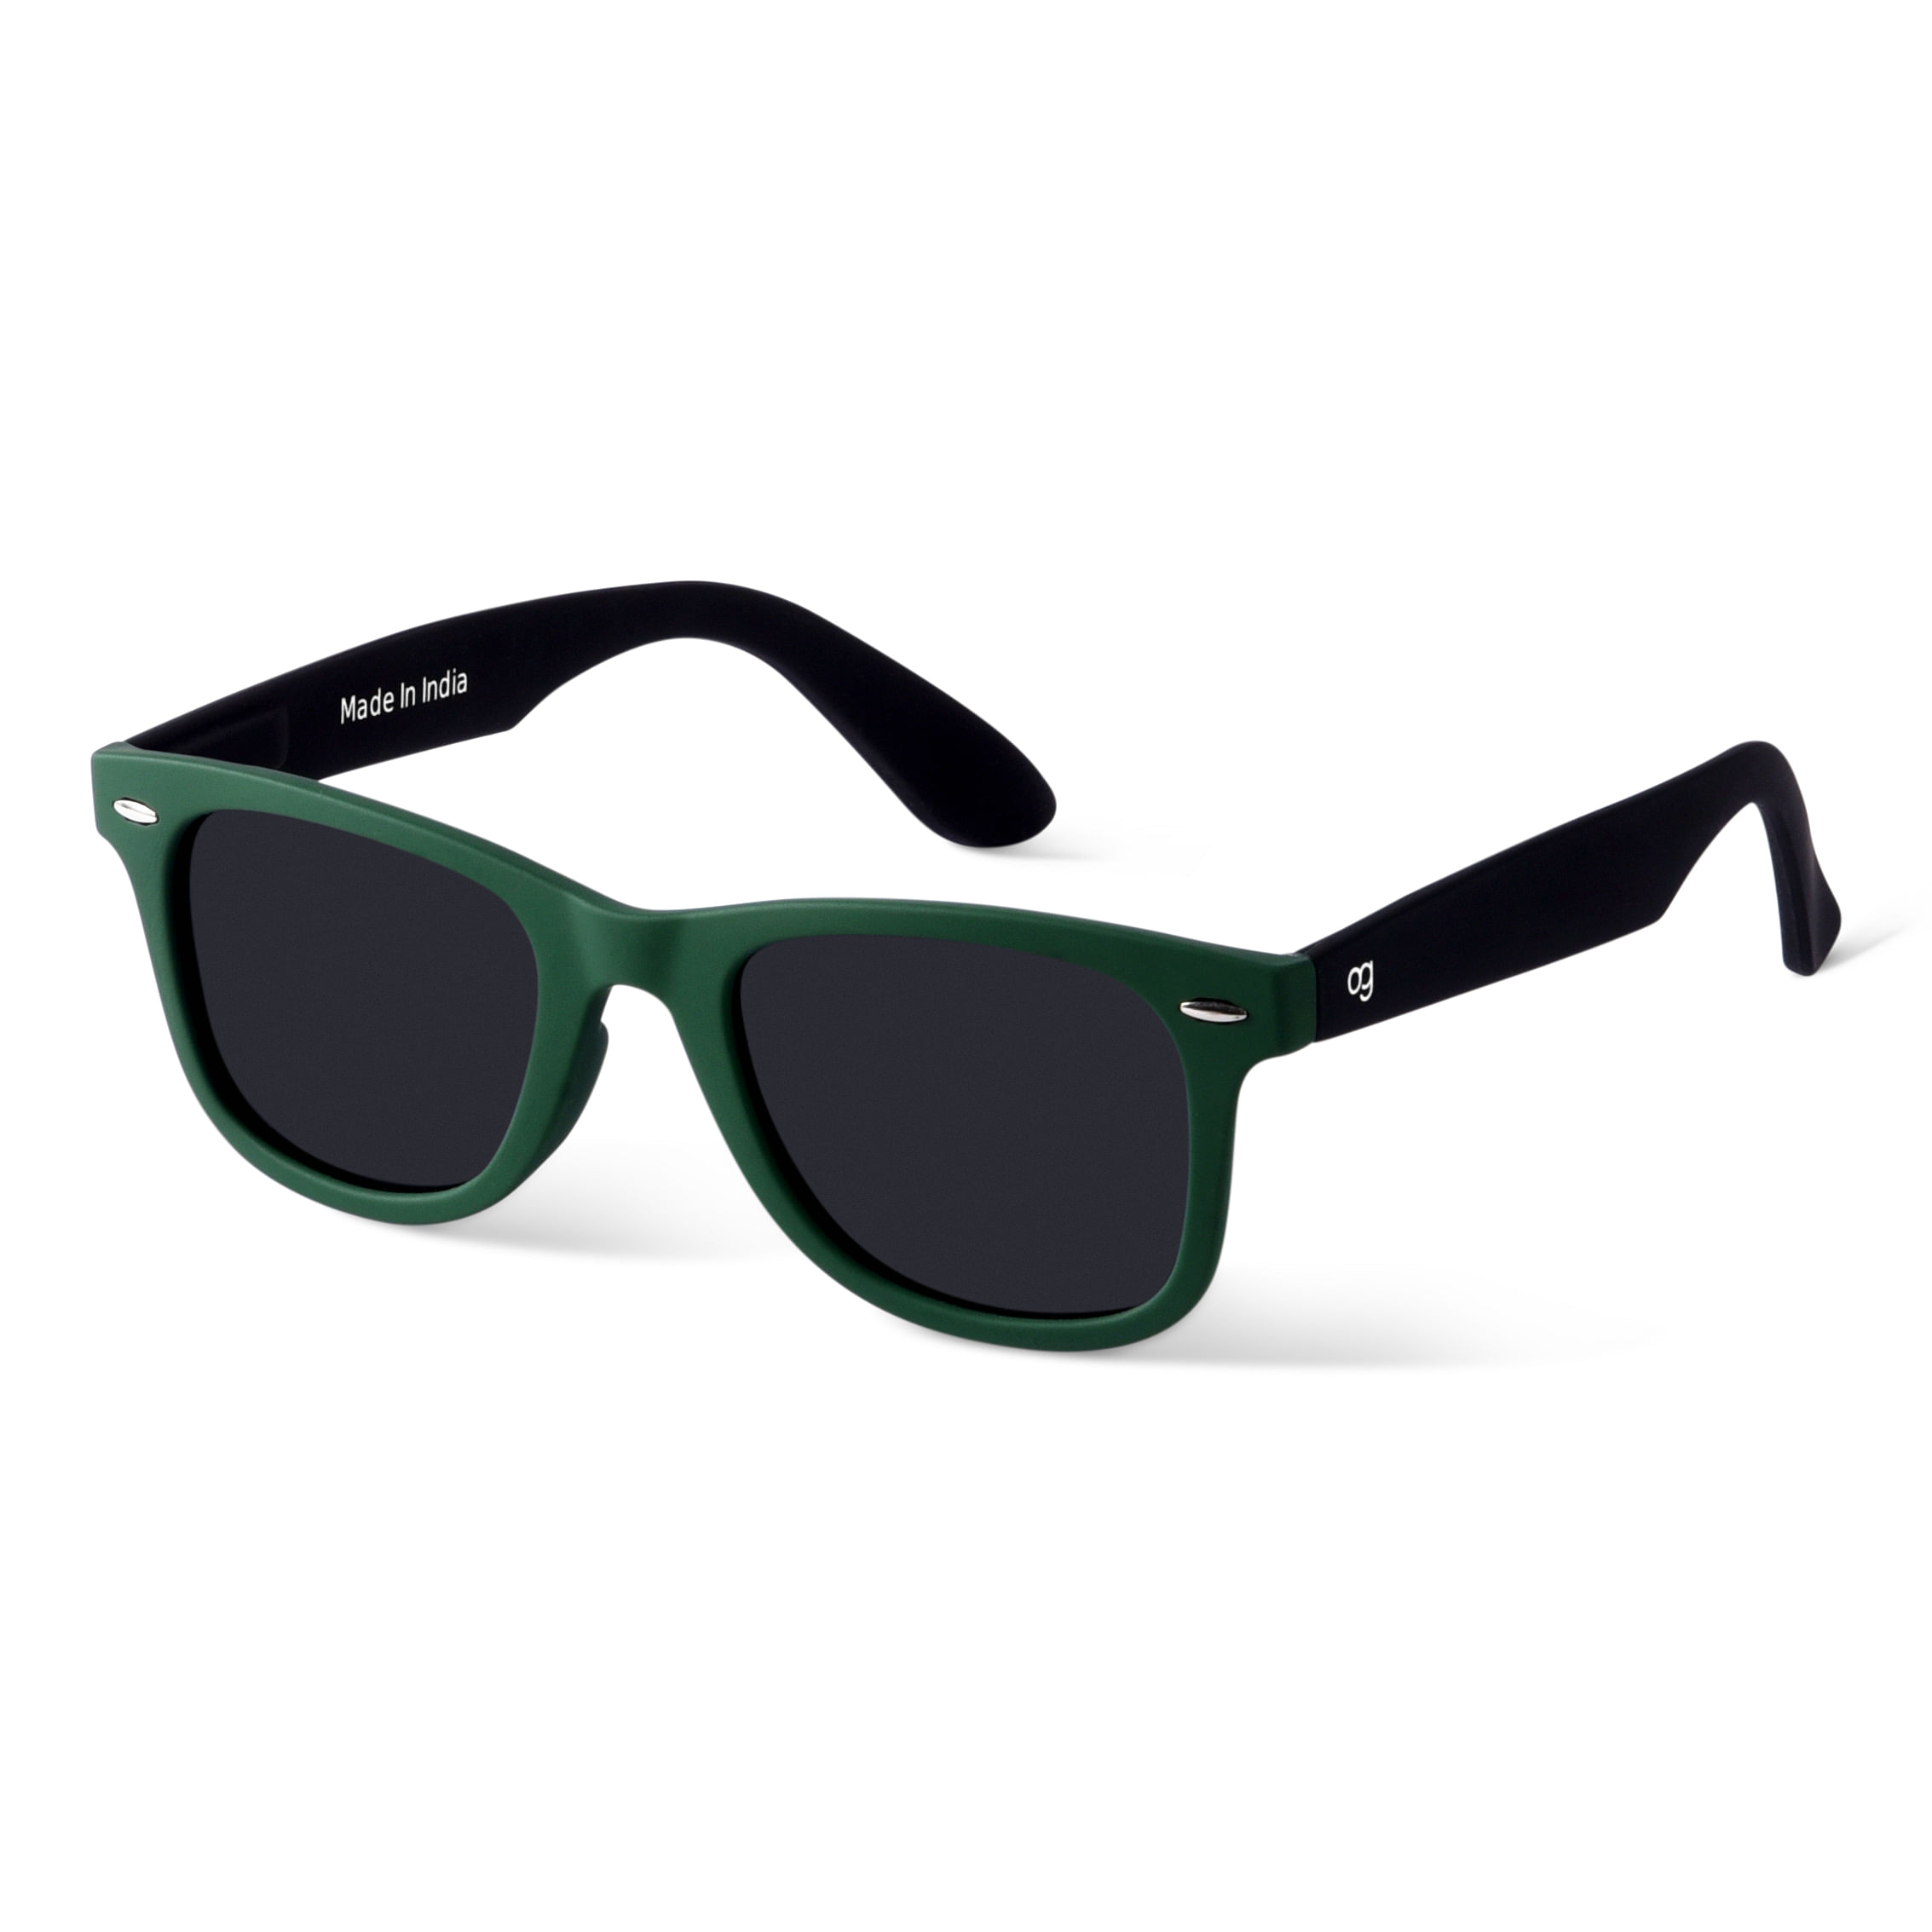 Buy Silver Lining Polarized Square Sunglasses - Woggles